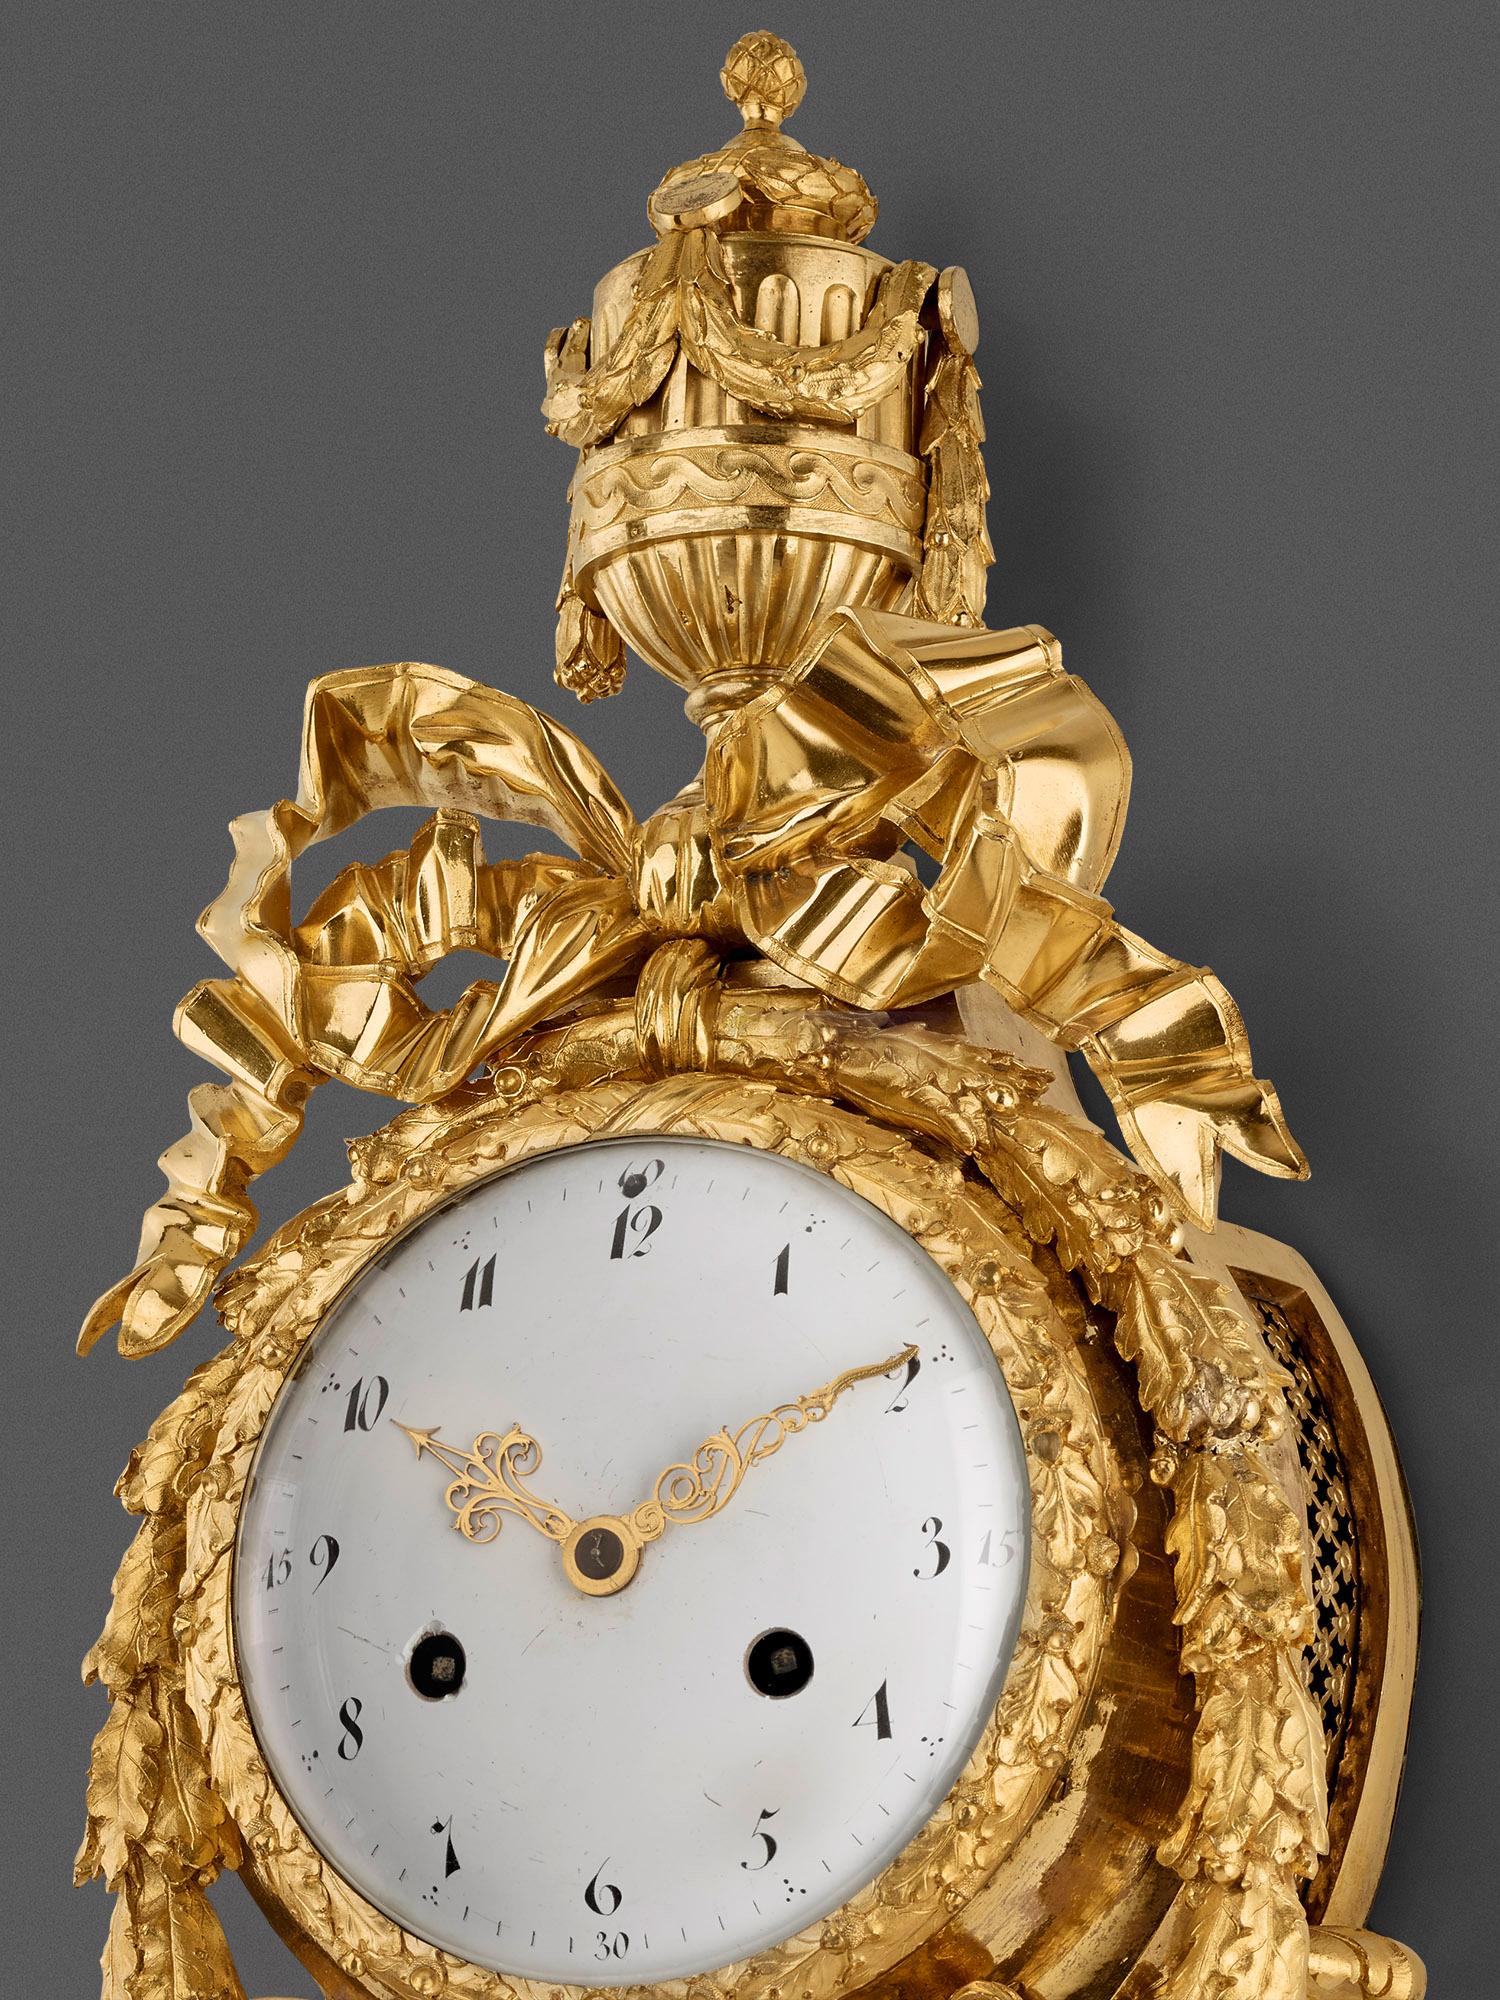 French, European, Cartel Gold Plated Wall Clock with Vase Top, Paris, Late 18th Century, Louis XVI

The case decorated with playful ornaments is cast in bronze, chased, fire-gilded and the surface partly polished. Elaborately bound garlands of